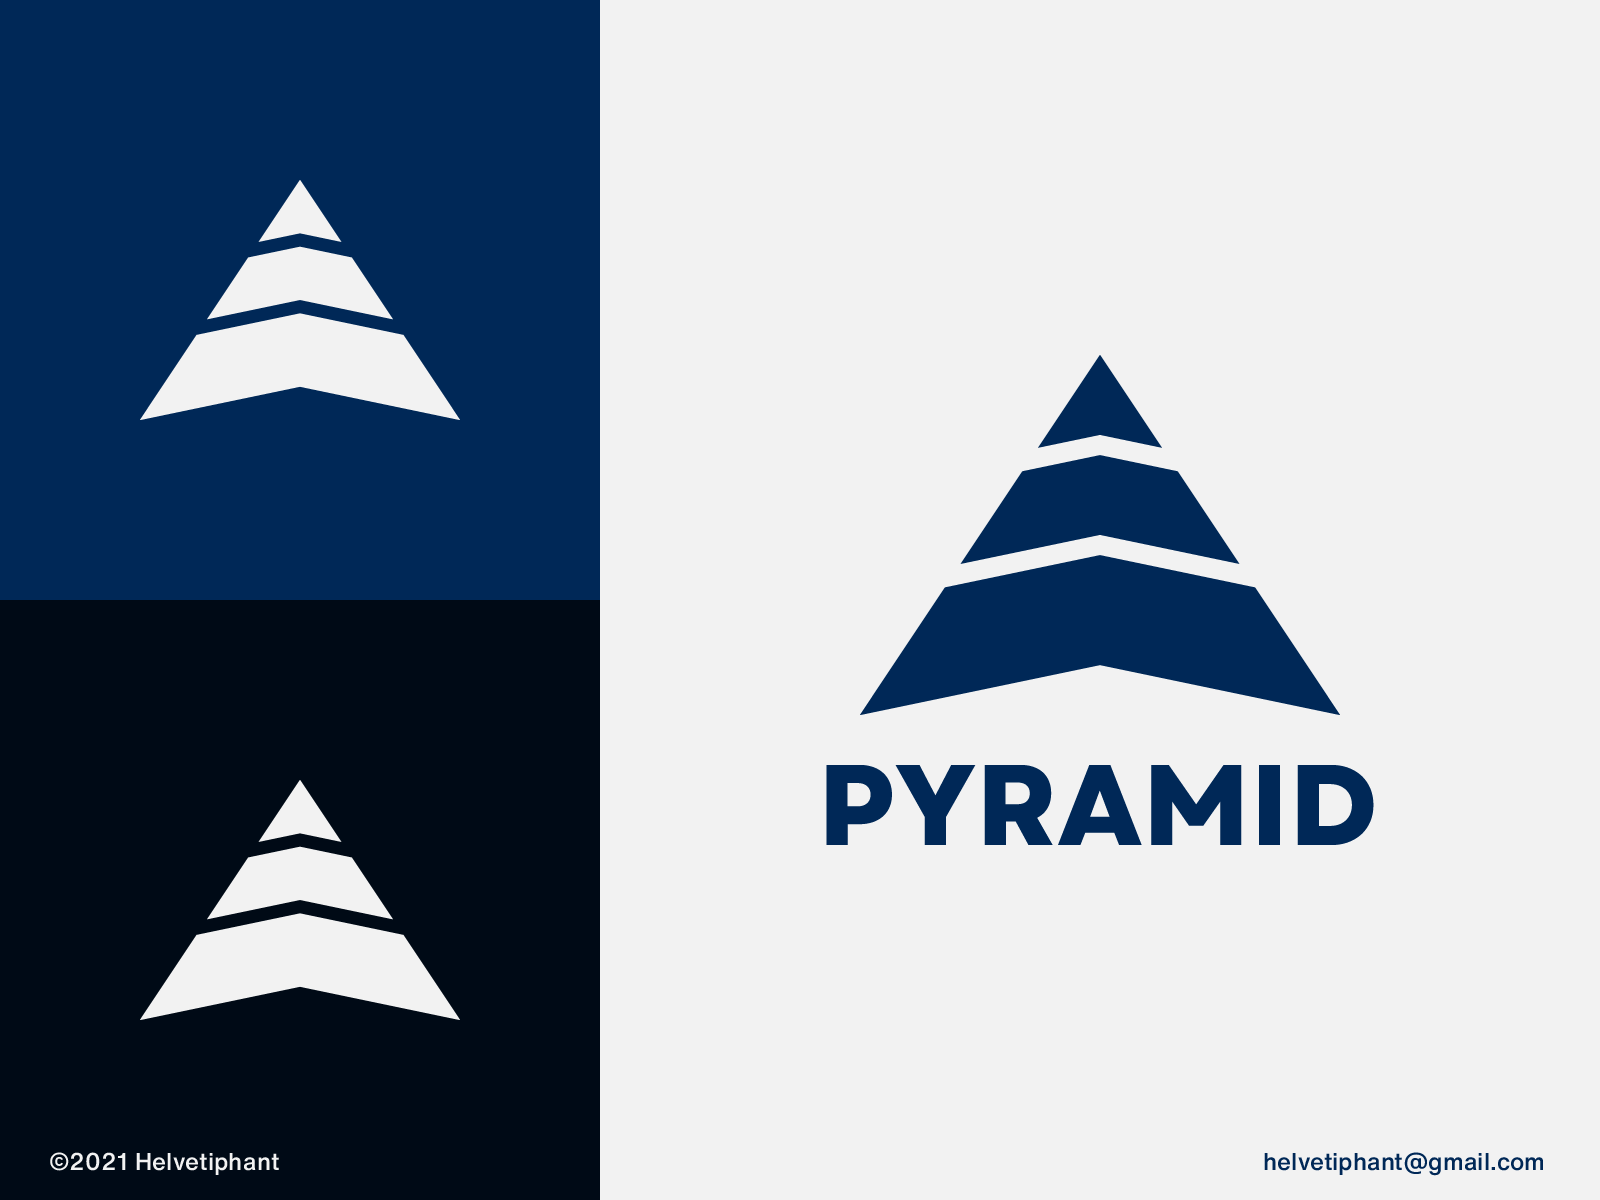 Pyramid - logo concept by Helvetiphant™ on Dribbble